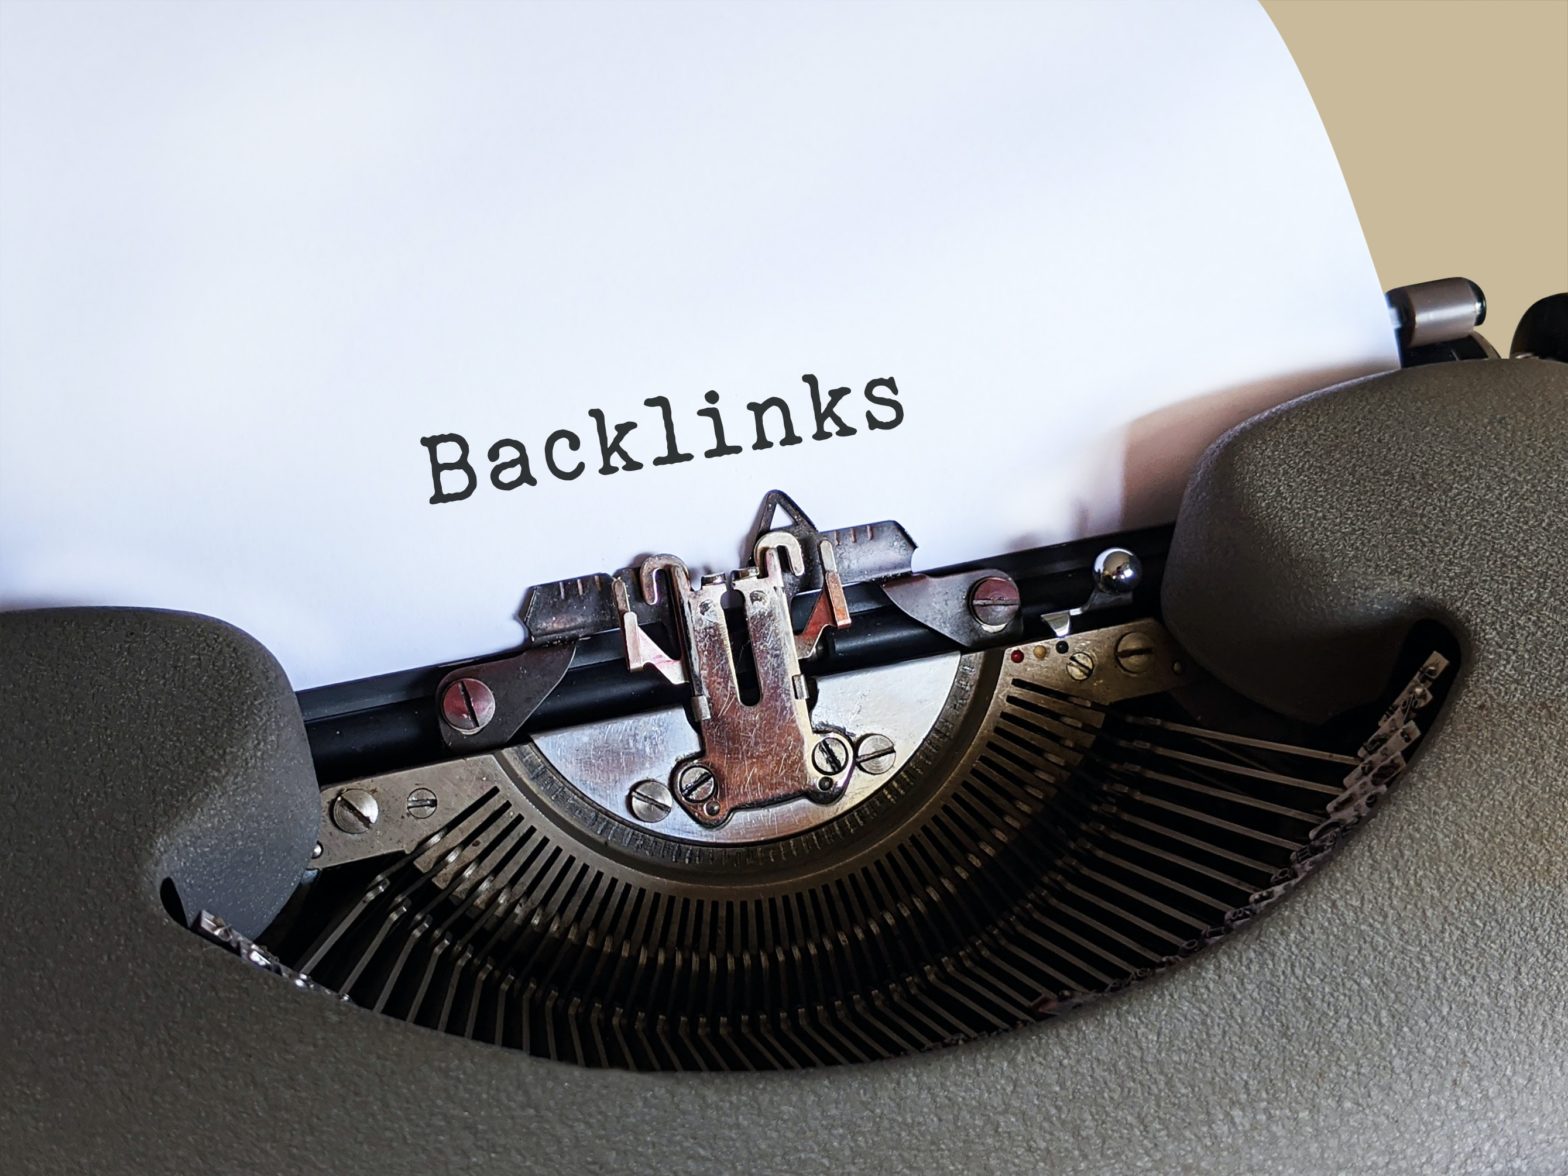 type writter with backlink typed on it